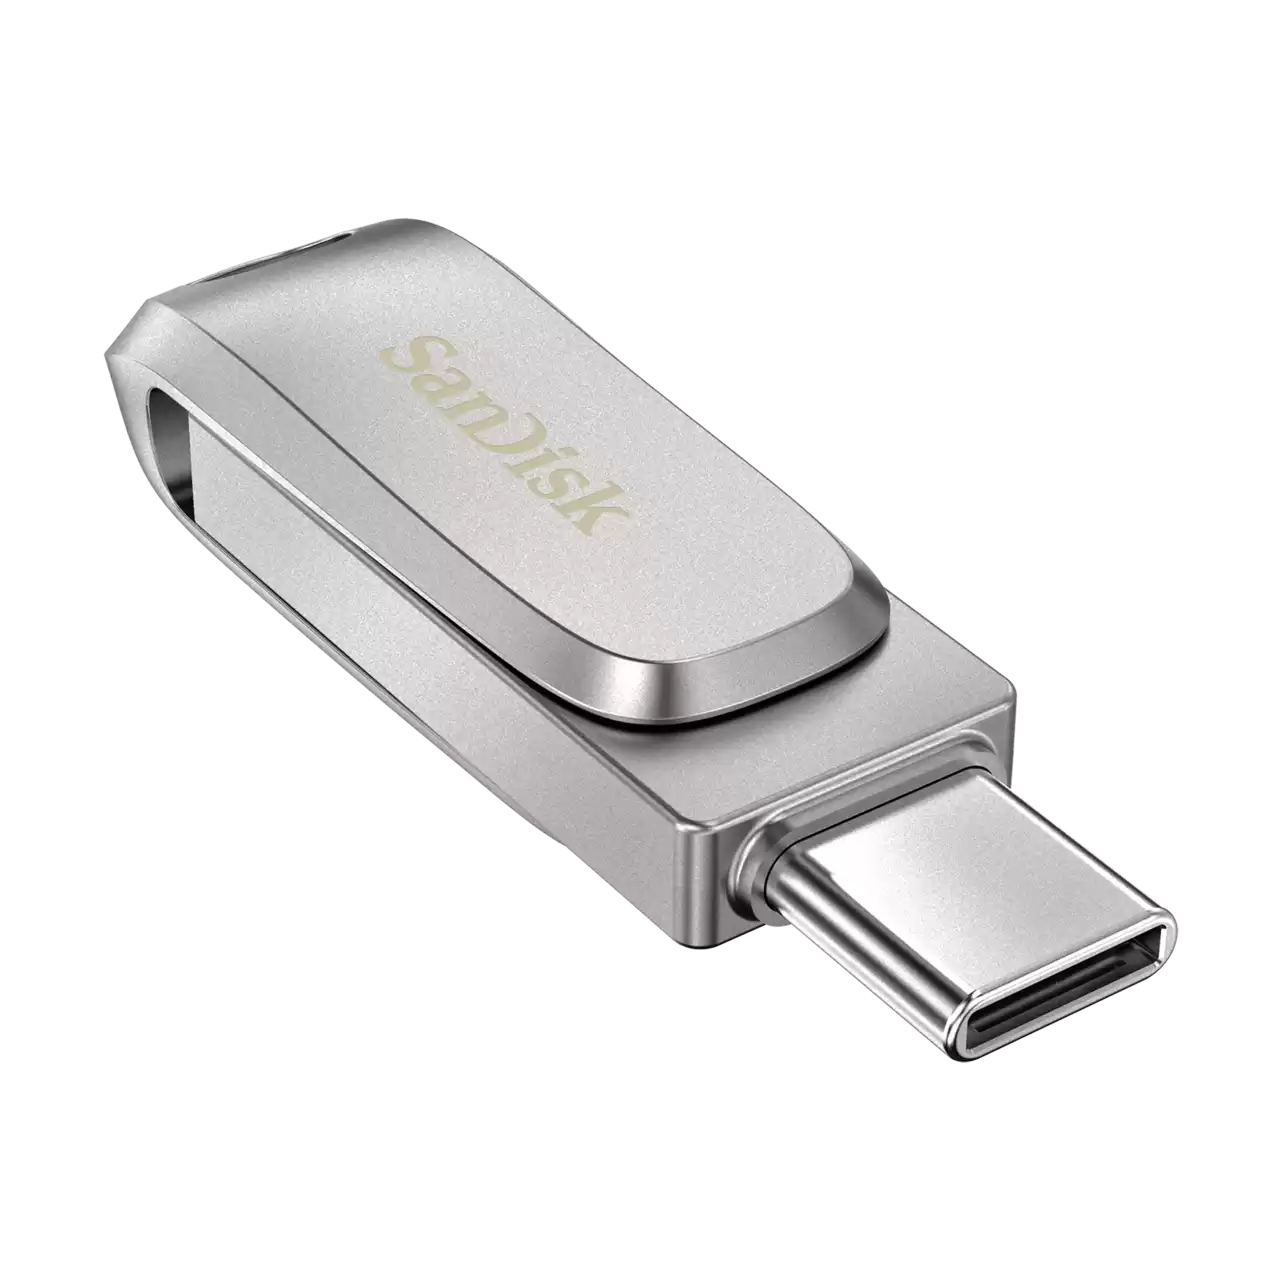 SanDisk Ultra Dual Drive Luxe Type-C + Type-A 400MB/s